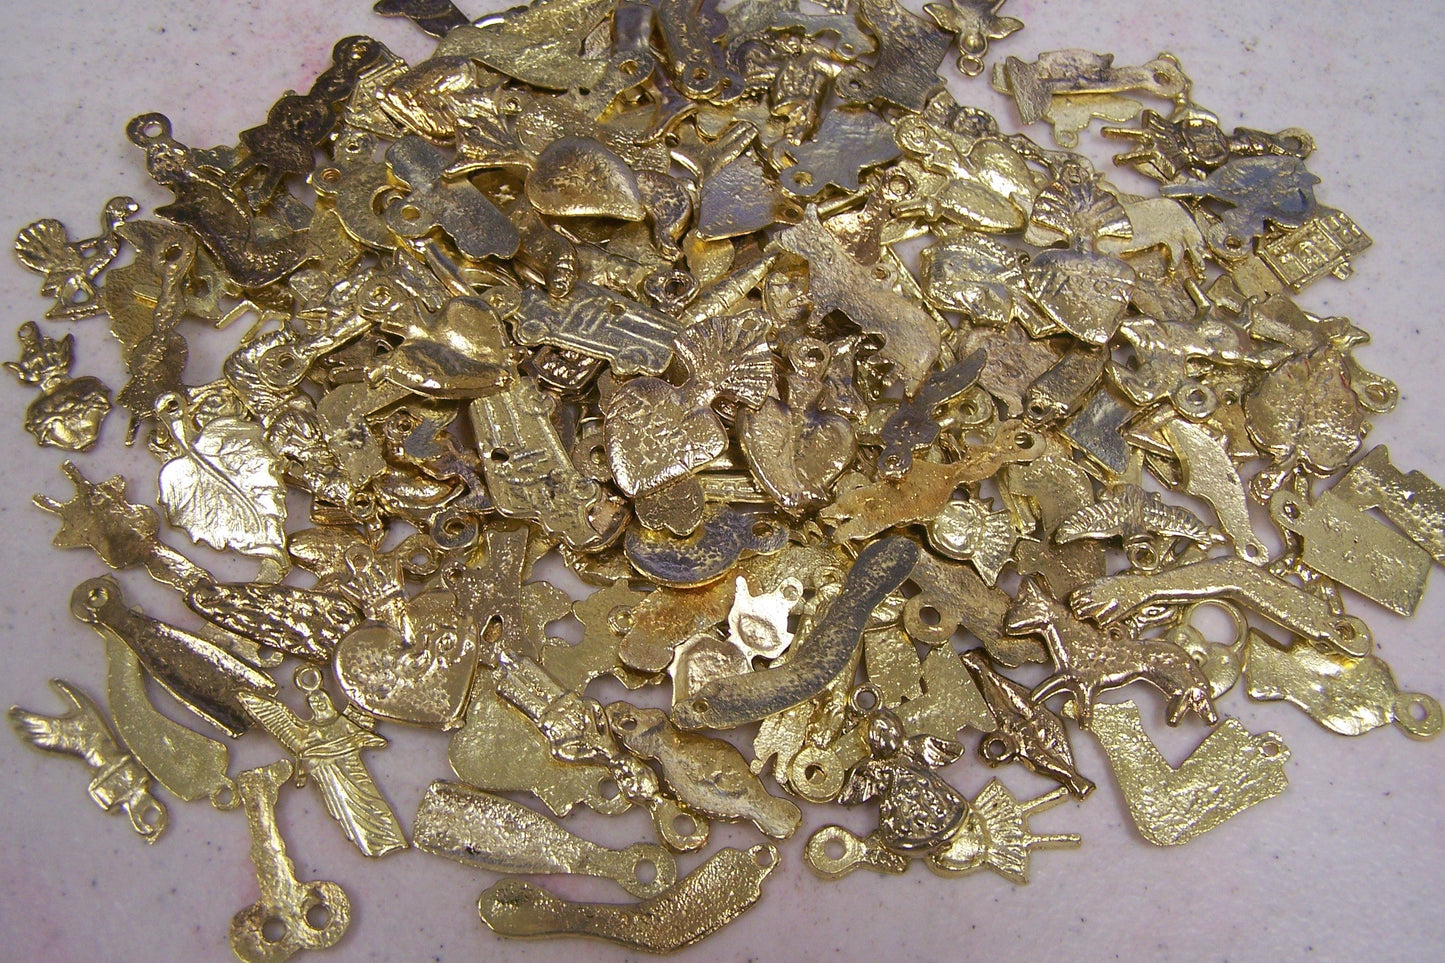 Lot of 100 Assorted Shiny Golden-Colored Milagros, Mexico